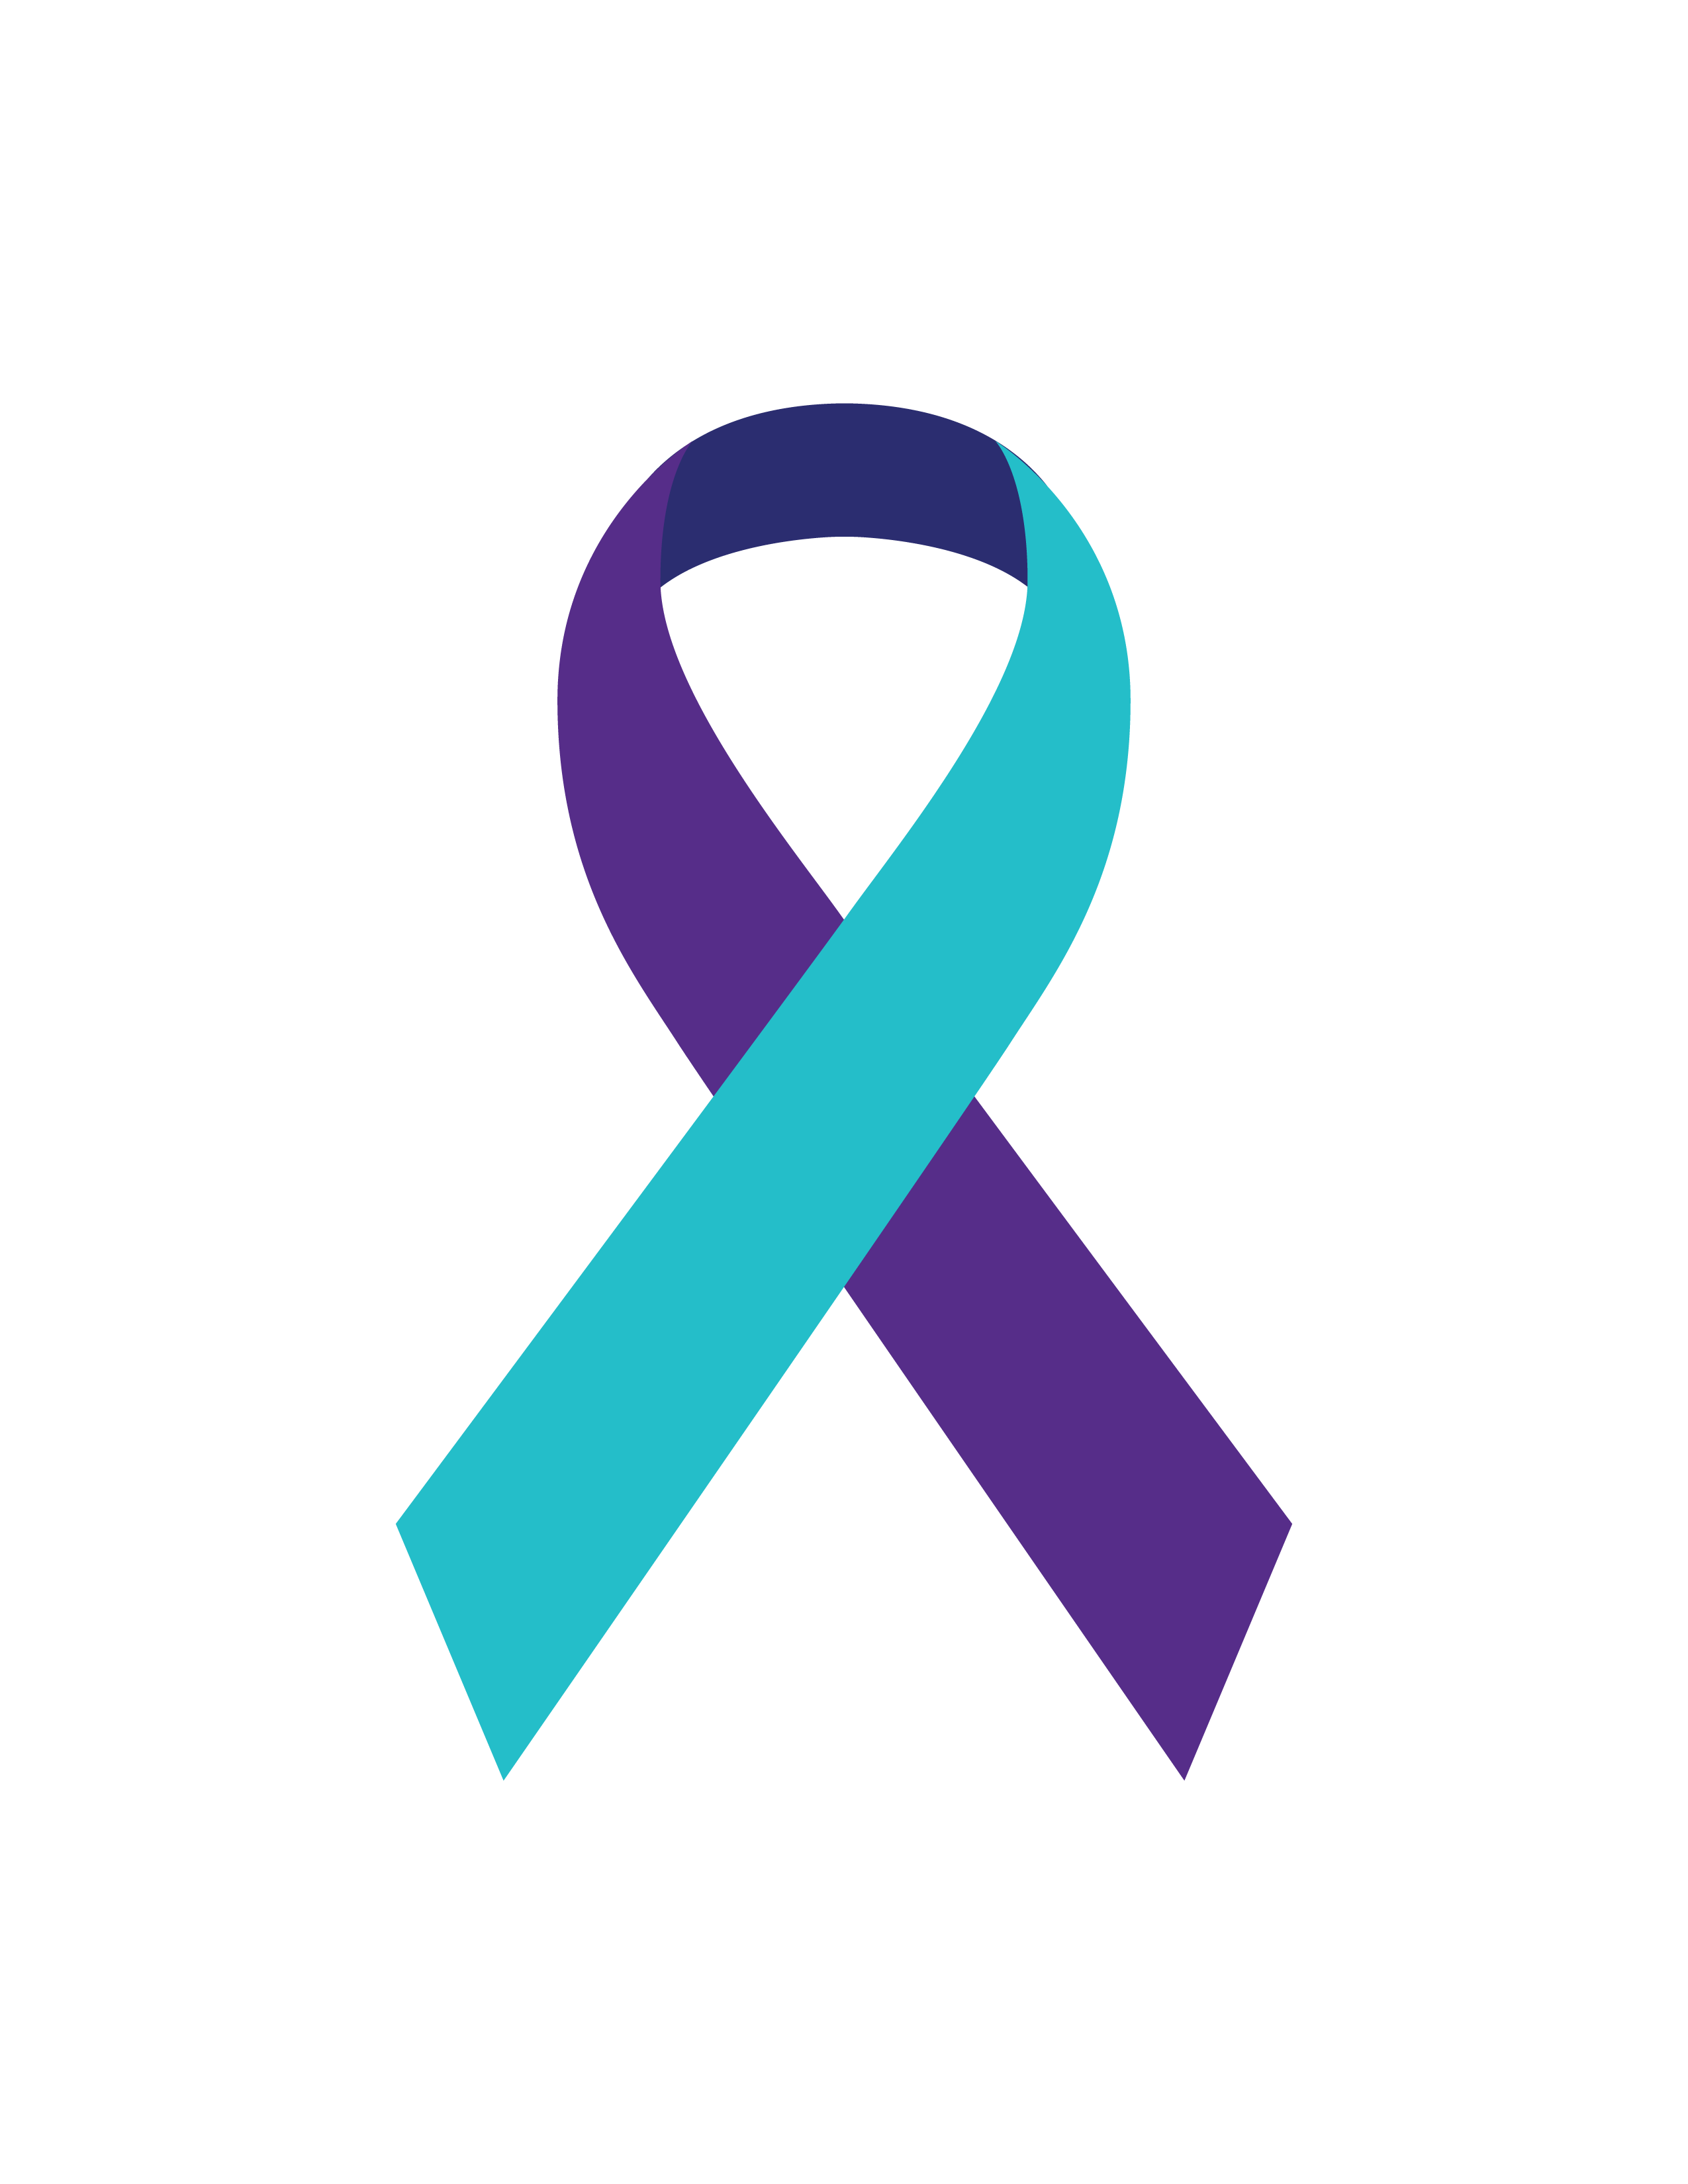 Suicide Prevention Month: “Break the stigma and have a conversation”